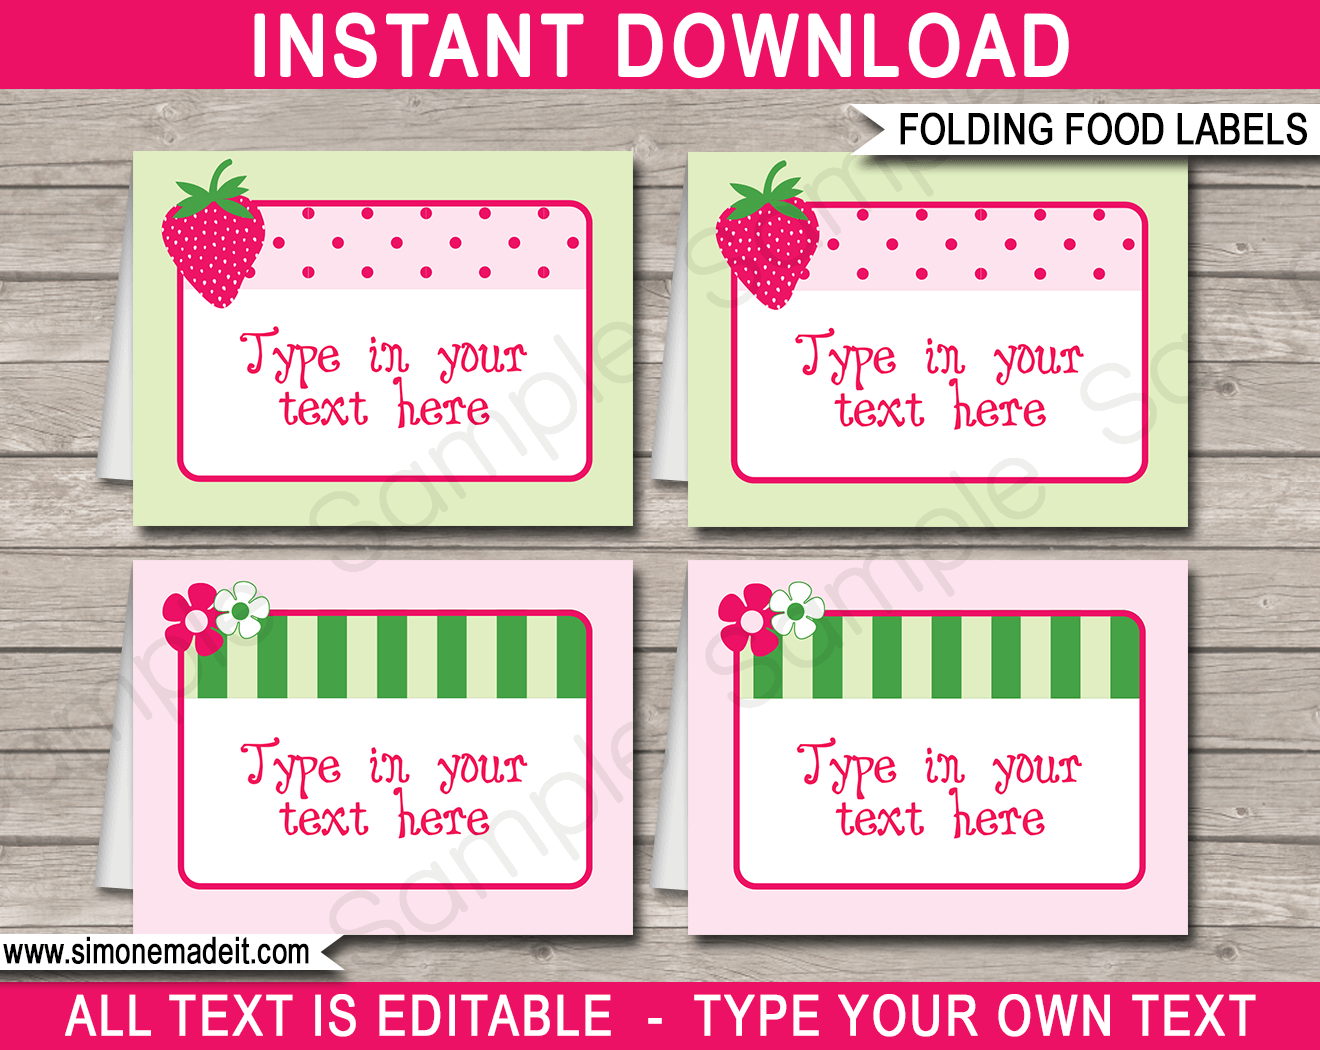 12 Strawberry Shortcake Themed Party Placecards/Food tents/Food labels